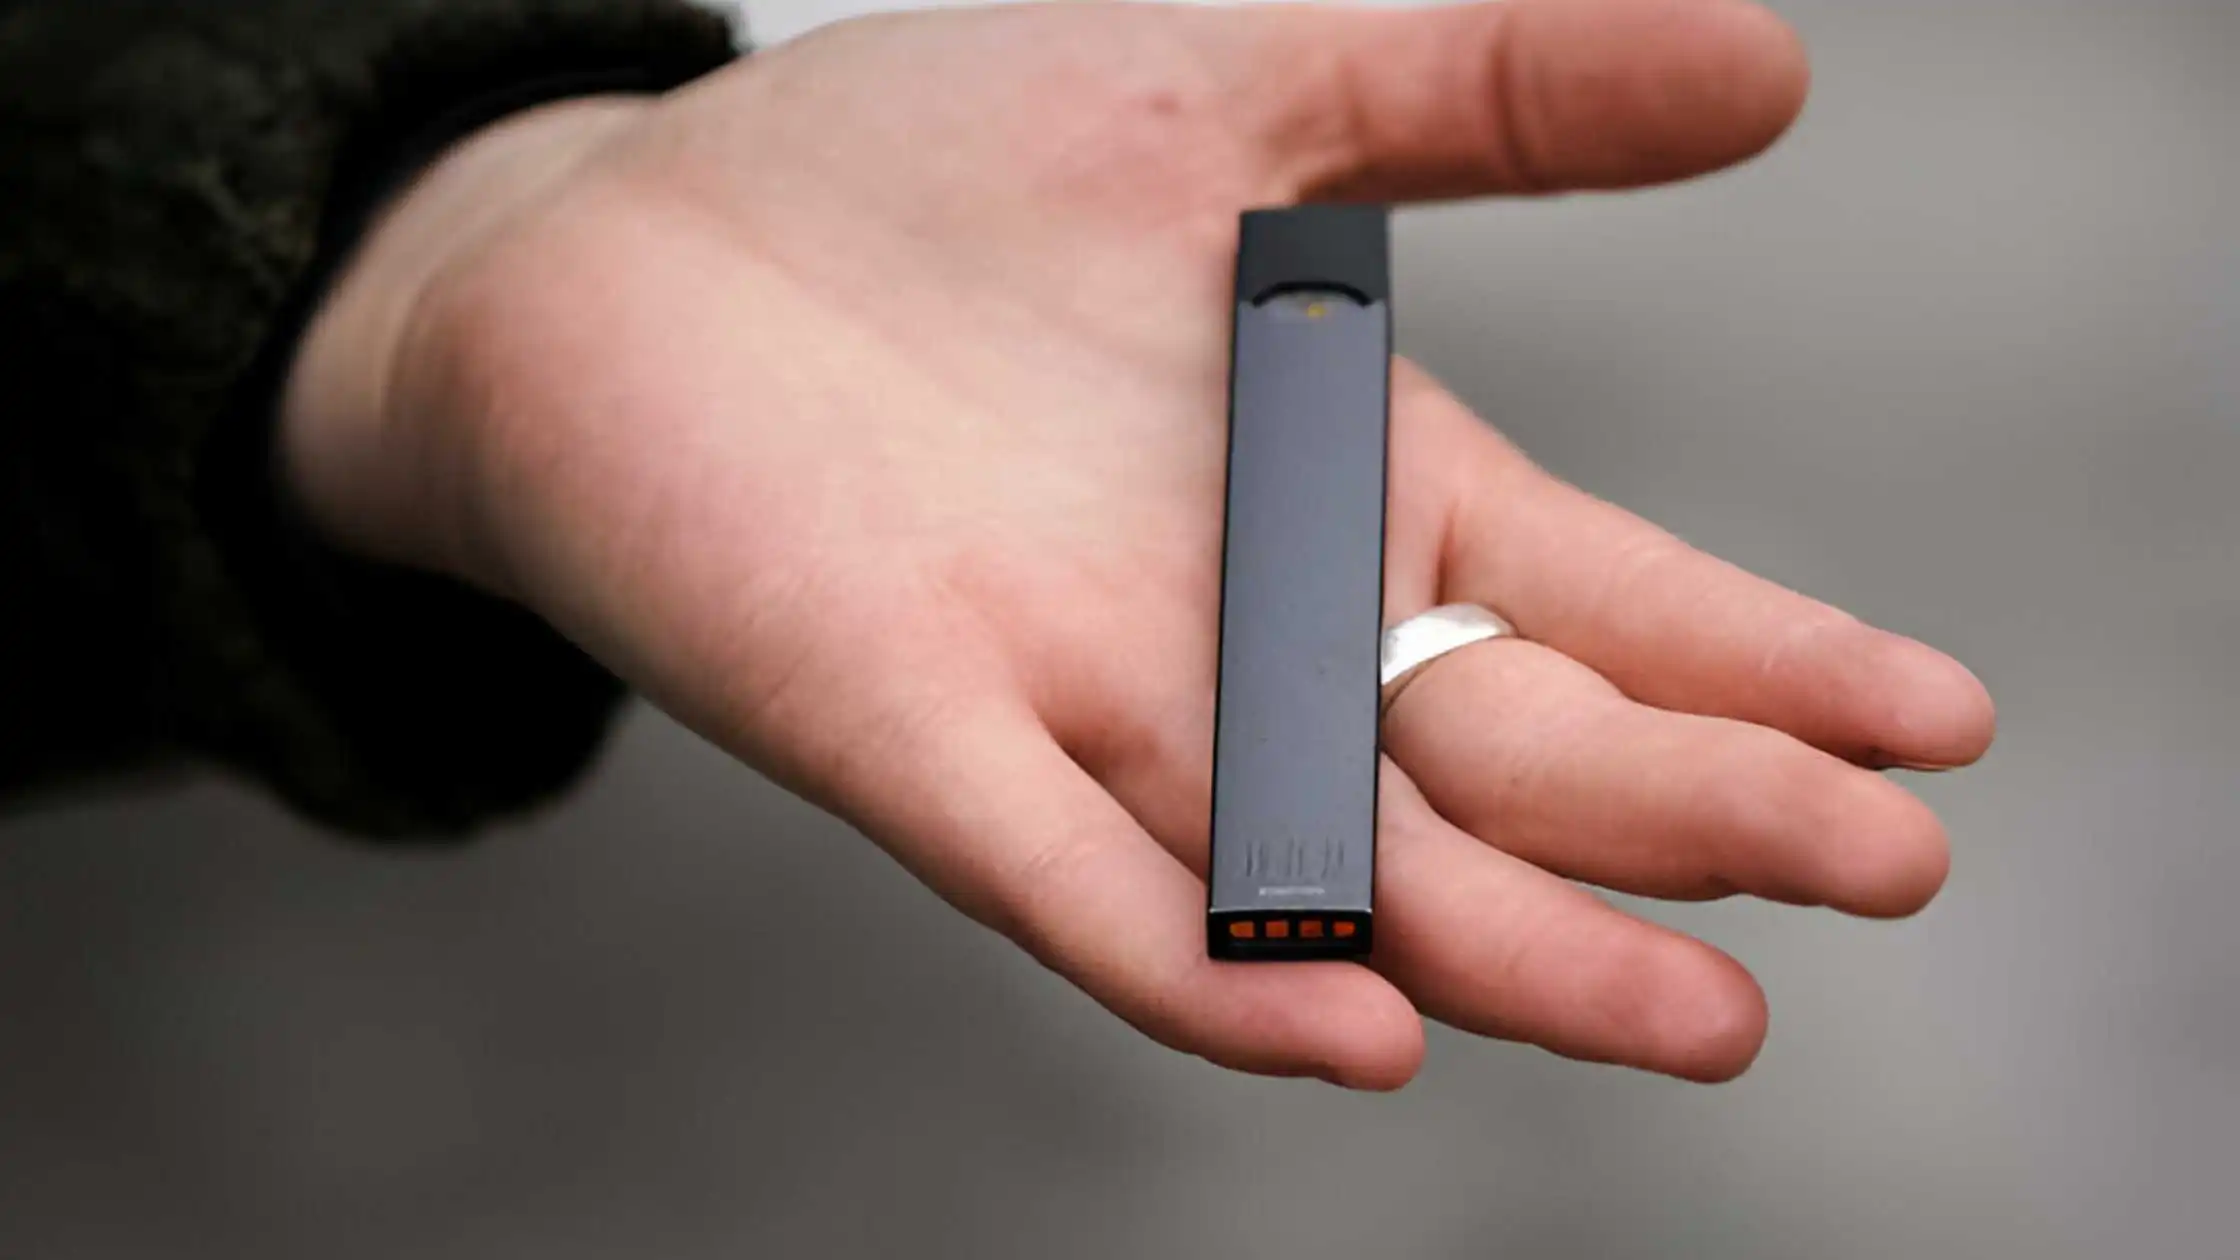 Juul Labs Agrees To Pay More Than $430 Million to Settle Vaping Probe